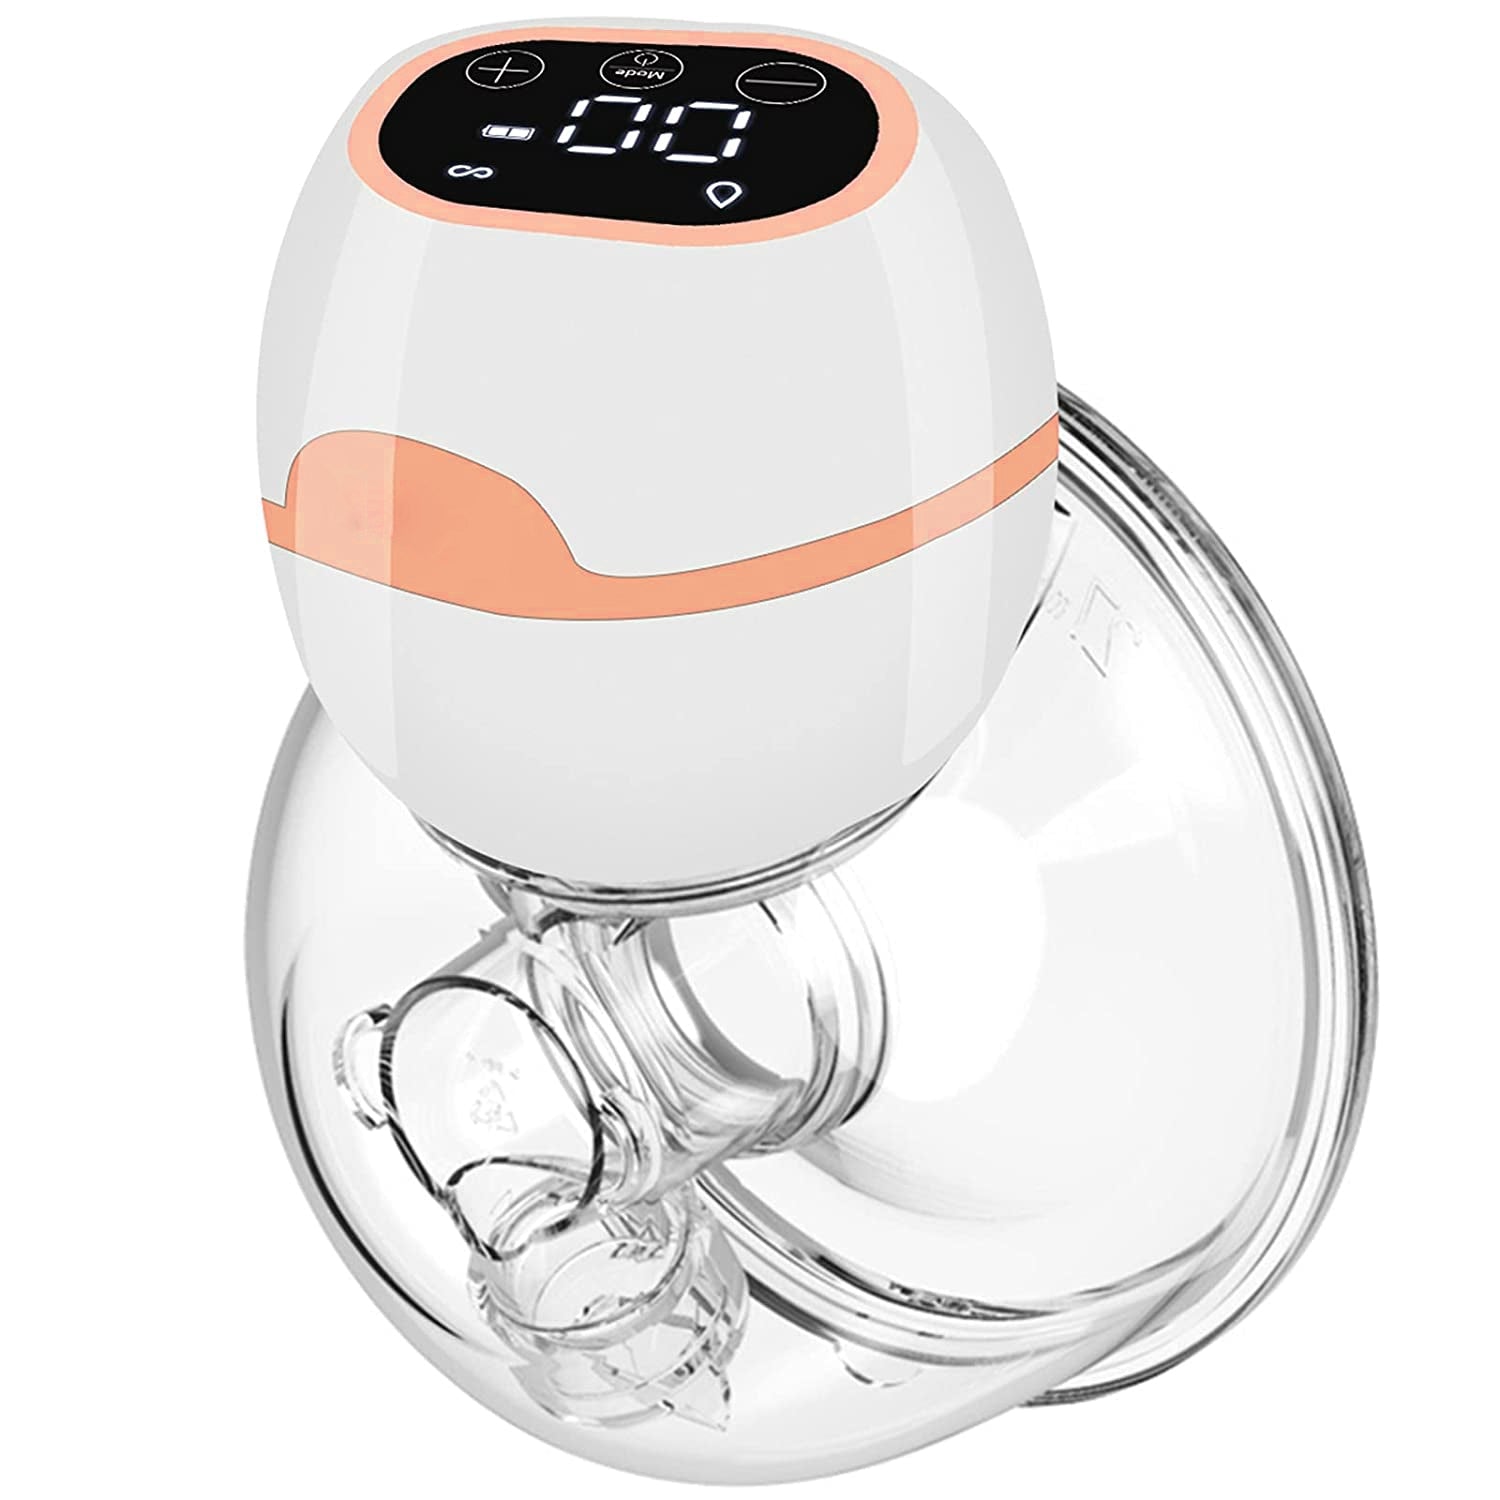 Iimcko® 1pc Electric Wearable Breast Pump, Free Portable Breast Pump, Can  Be Worn In The Bra, The Baby Plan To Breastfeed Essential